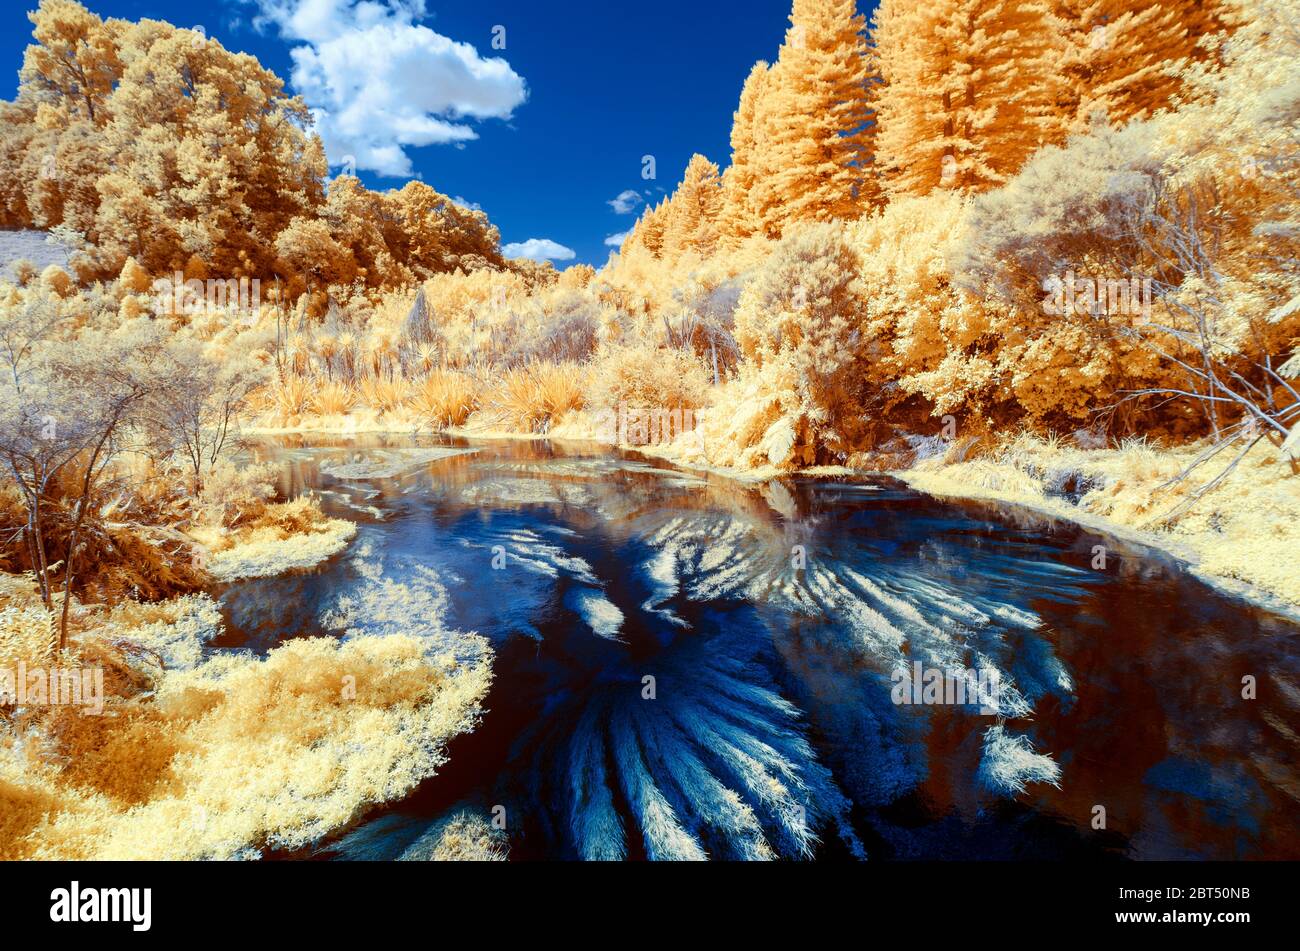 Infrared image of blue river with lined with golden foliage under a blue sky with clouds Stock Photo